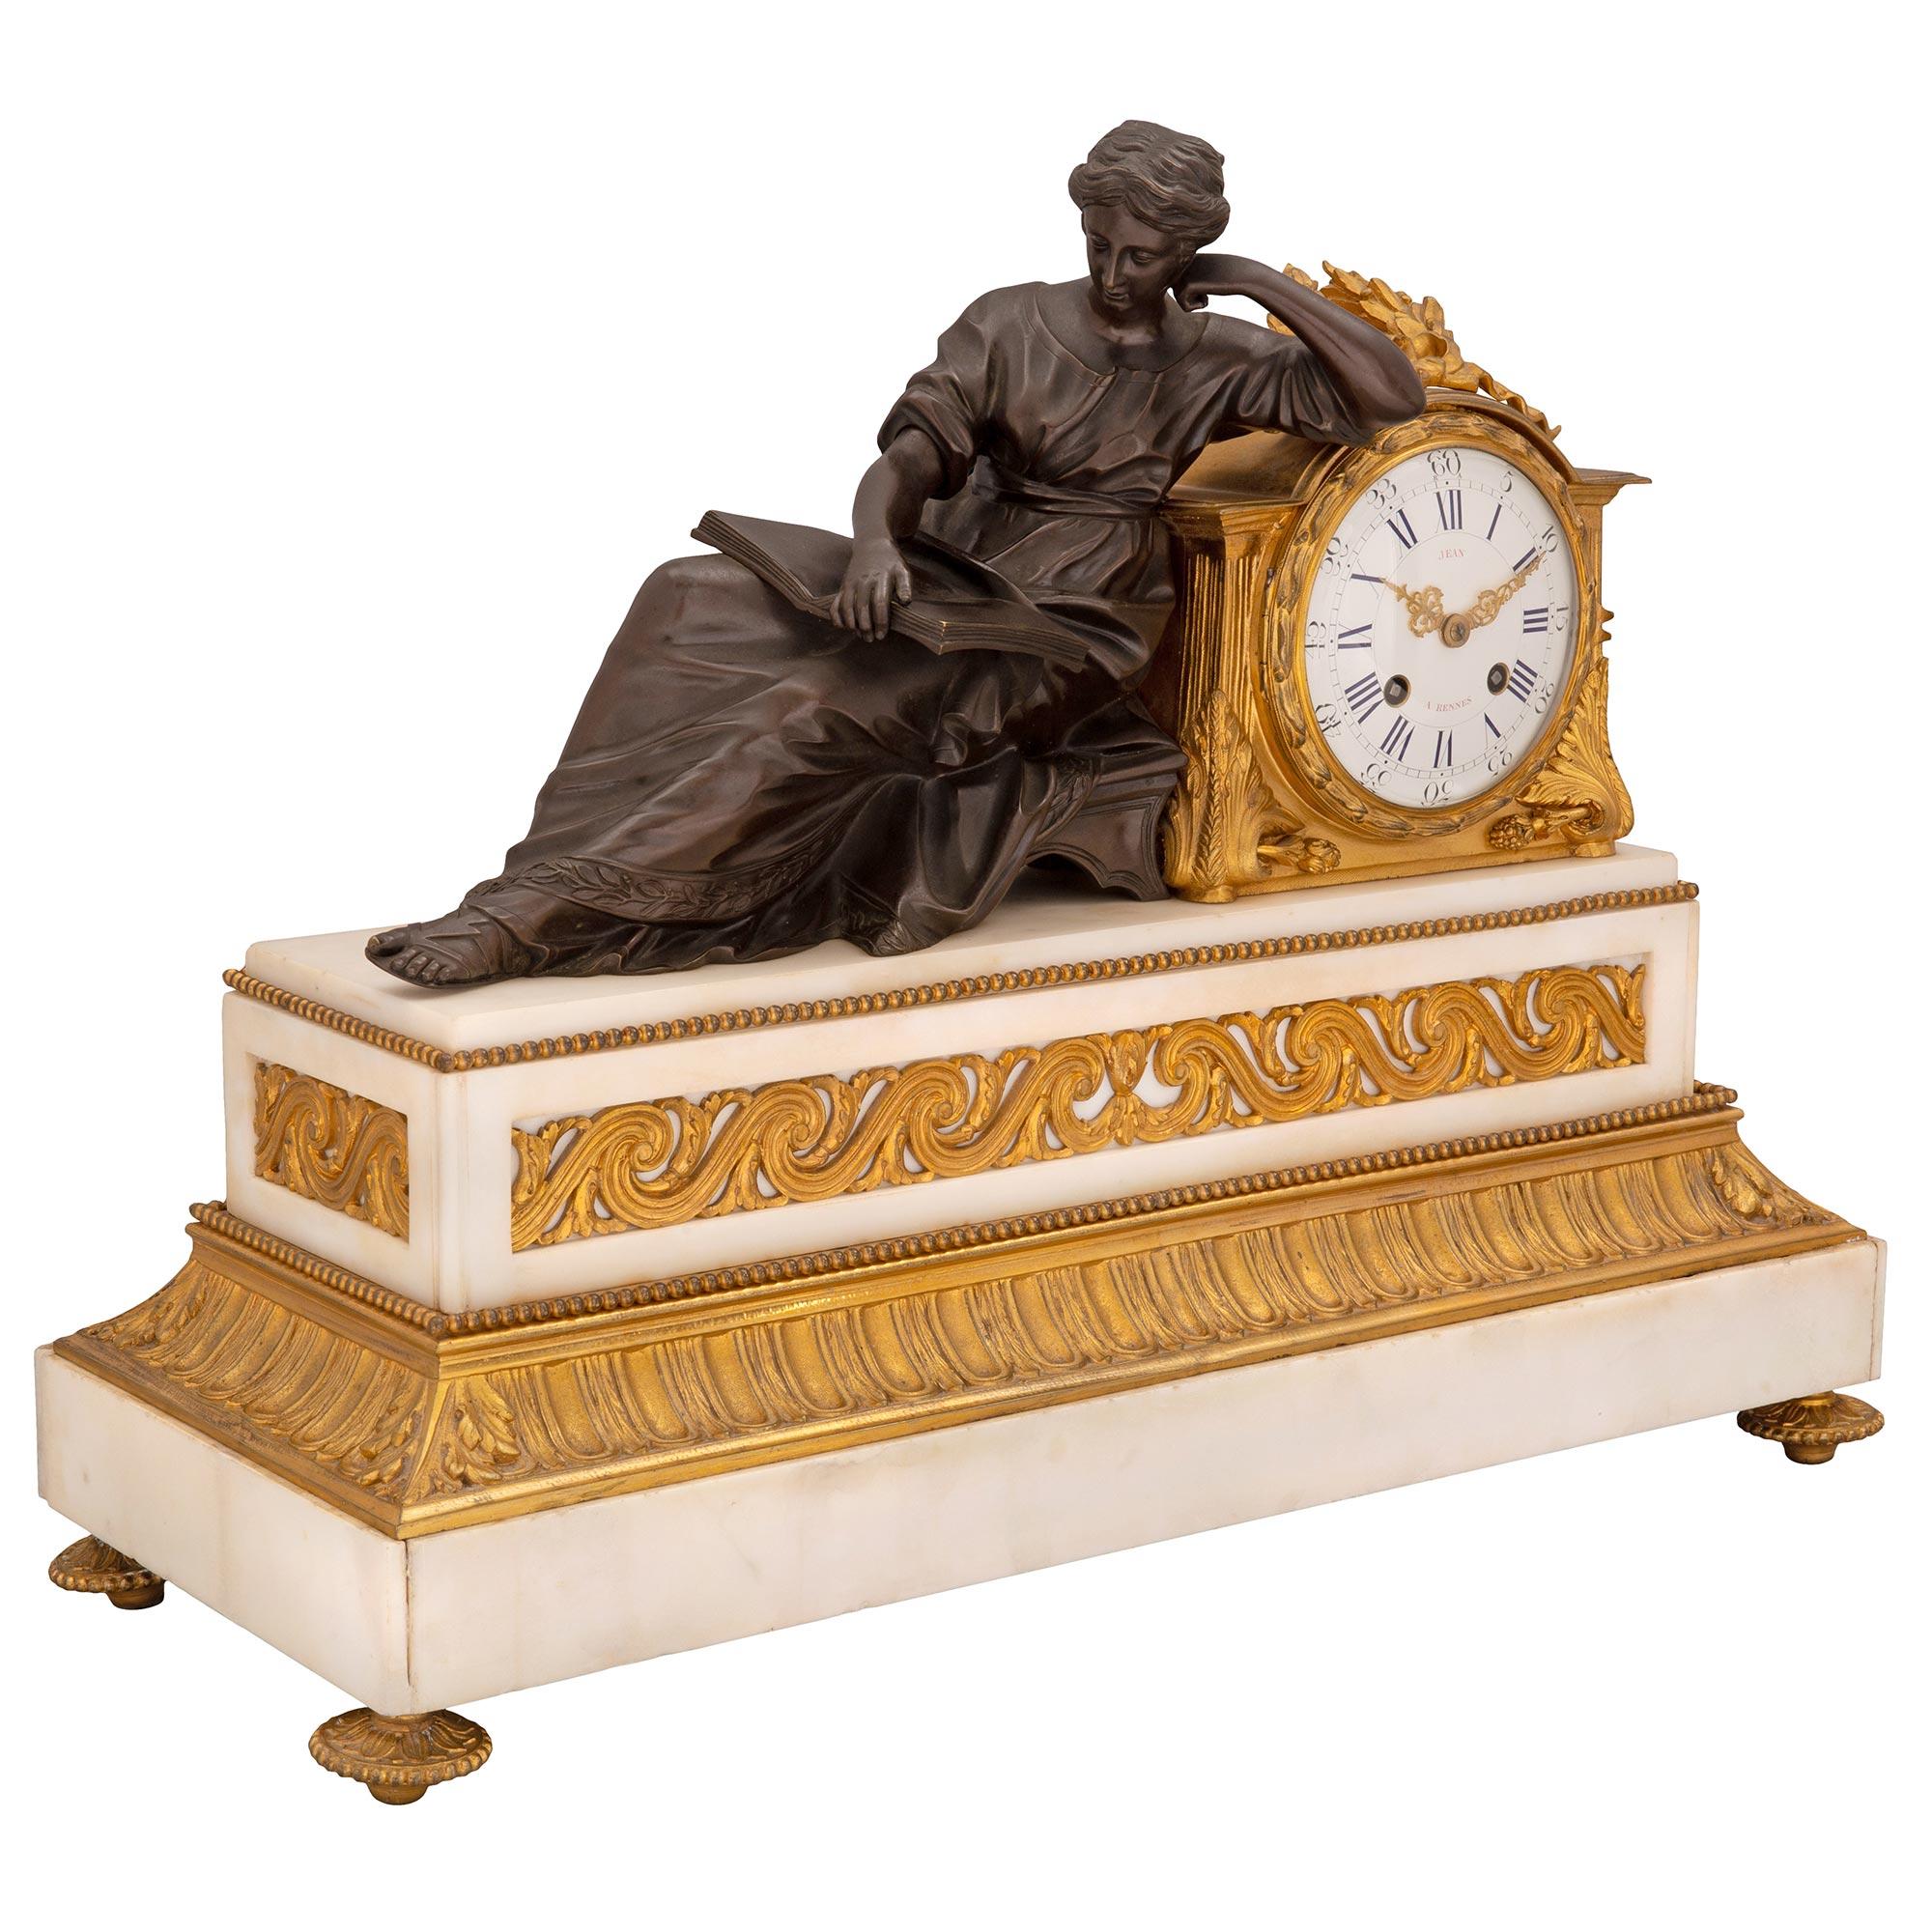 An elegant and high quality French 19th century Louis XVI st. white Carrara marble, ormolu and patinated bronze clock, signed Jean, A Rennes. The clock is raised by four fine topie shaped feet with a lovely foliate and beaded design. The rectangular